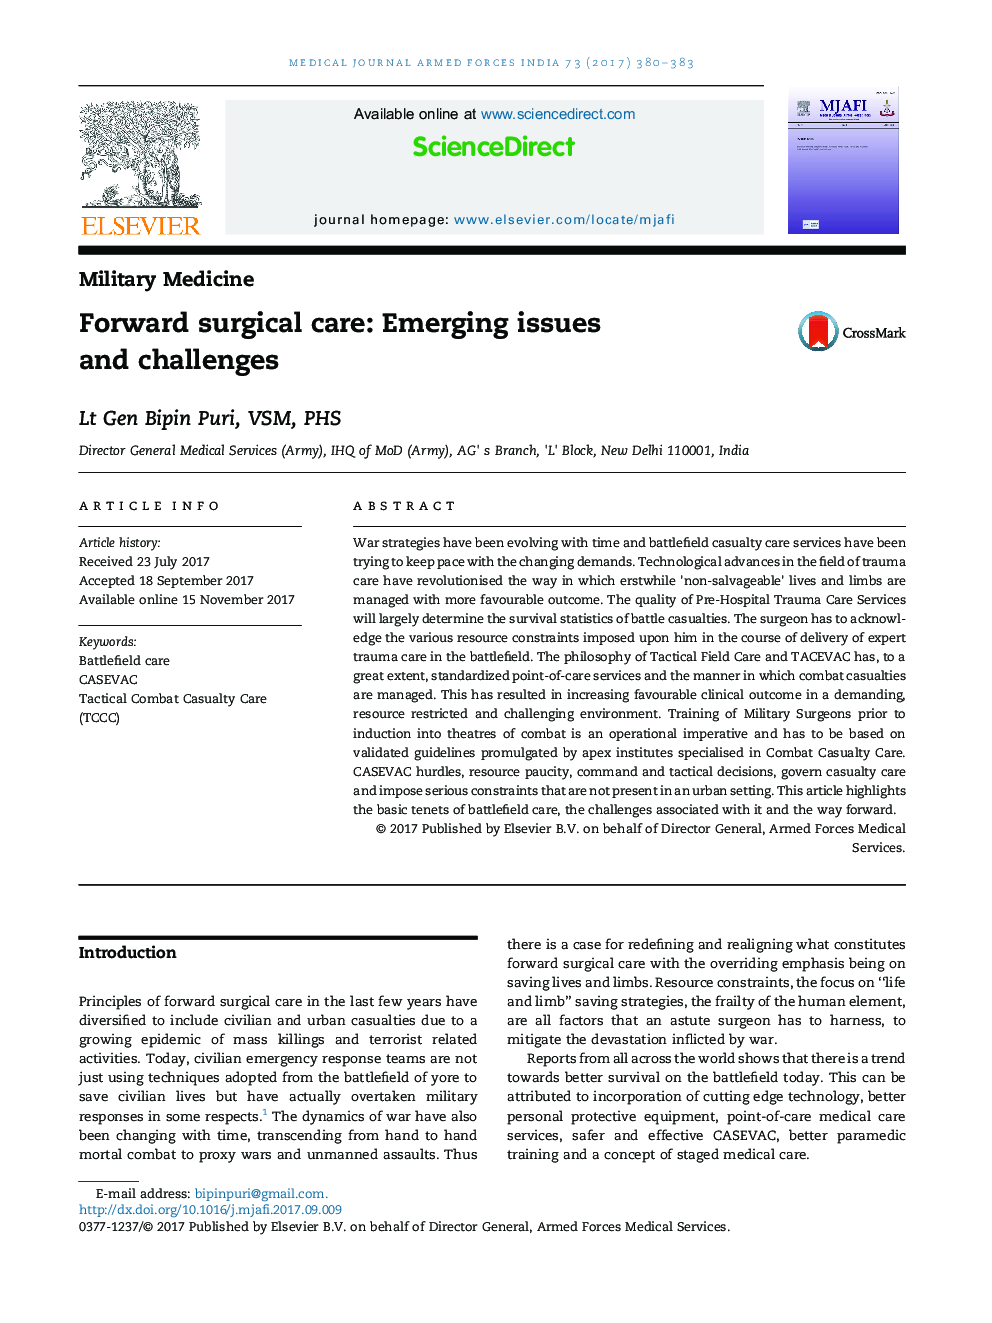 Forward surgical care: Emerging issues and challenges